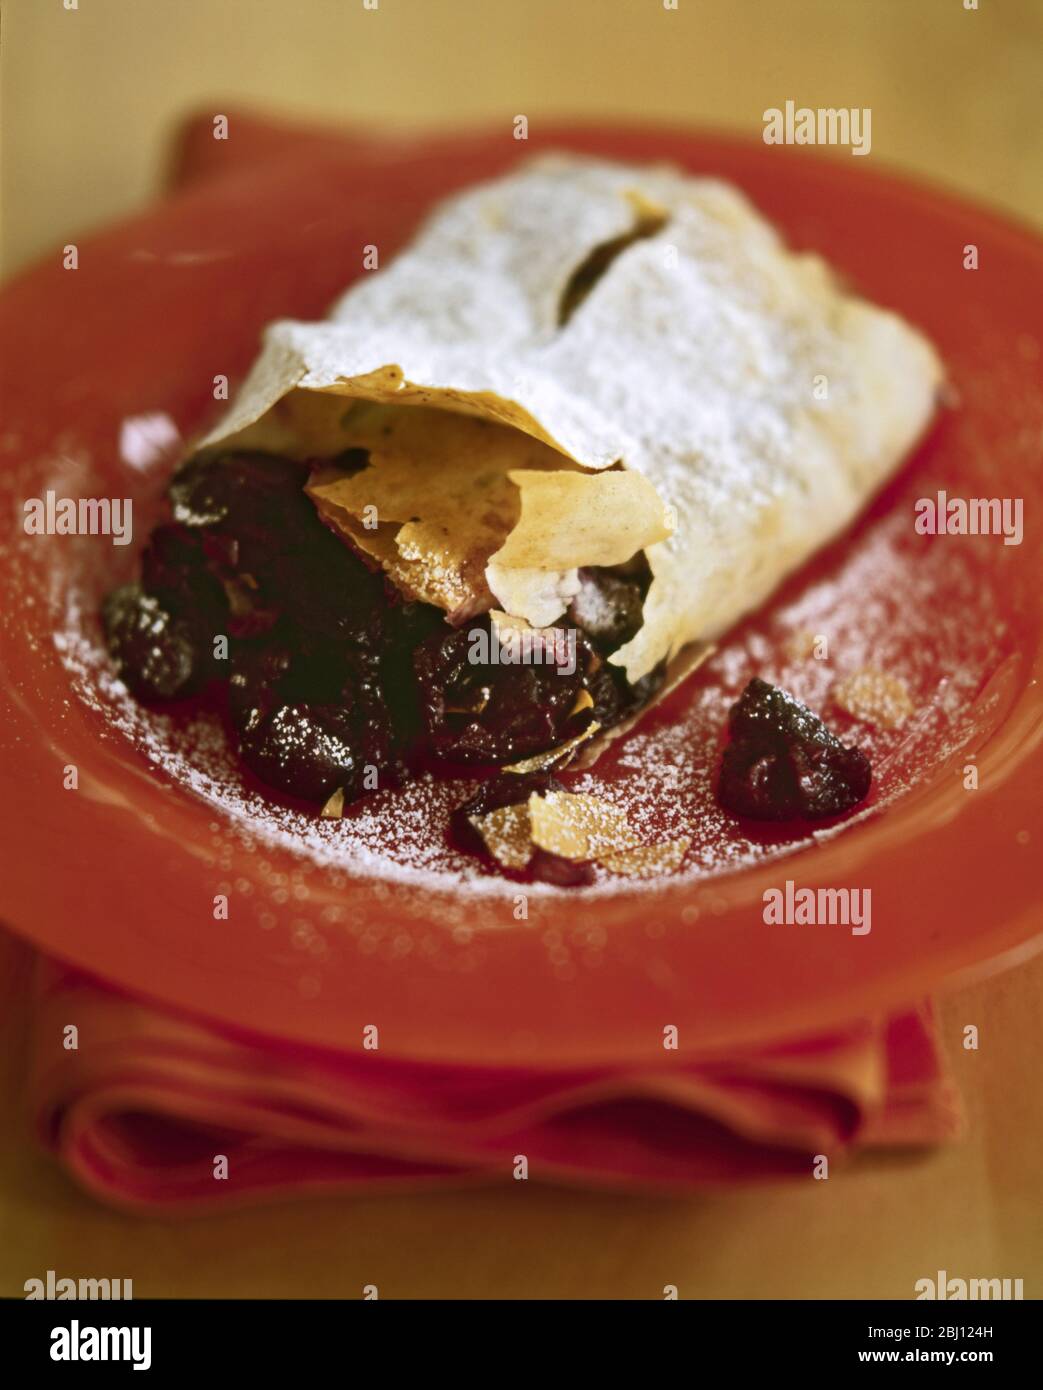 Plum strudel woth filo pastry - Stock Photo